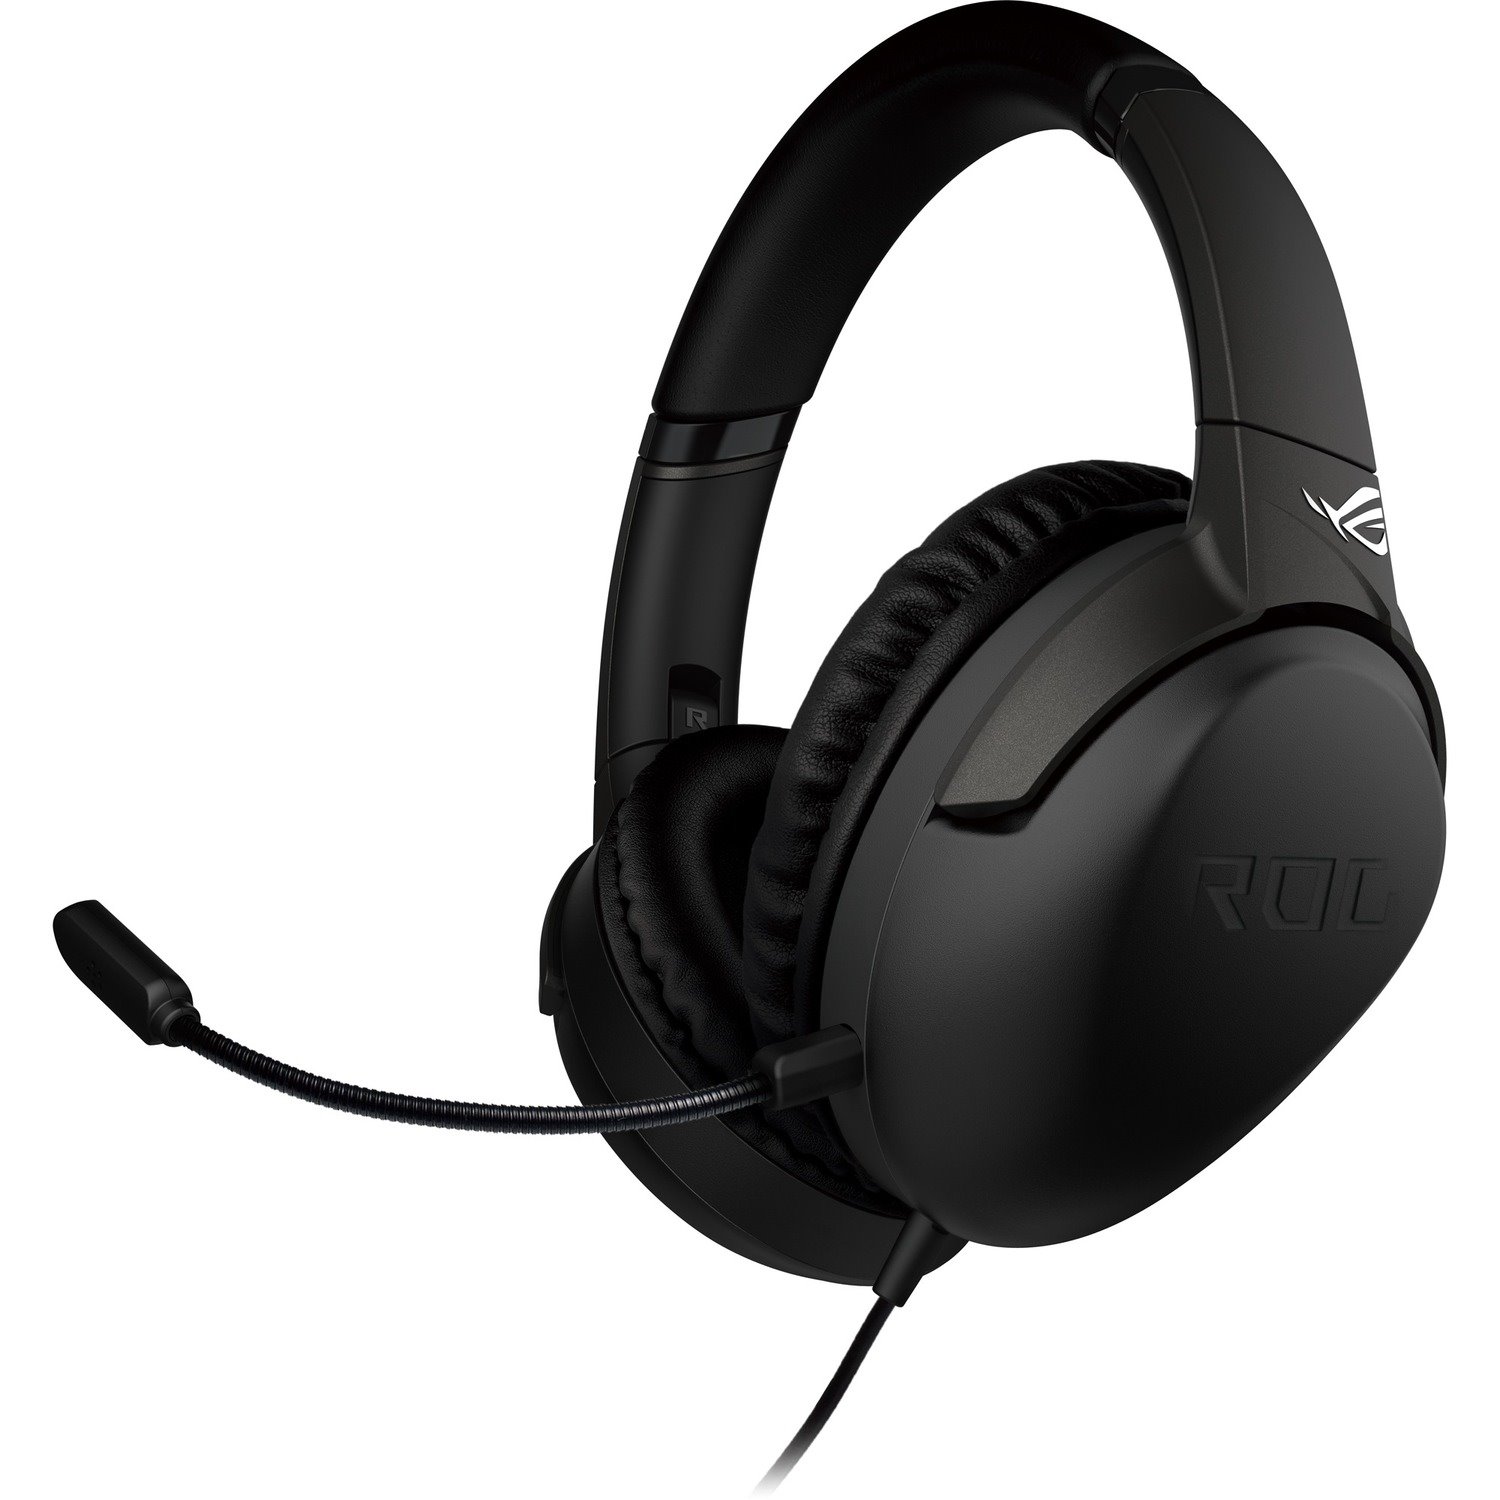 Asus ROG Strix Go Core Wired Over-the-head Stereo Gaming Headset